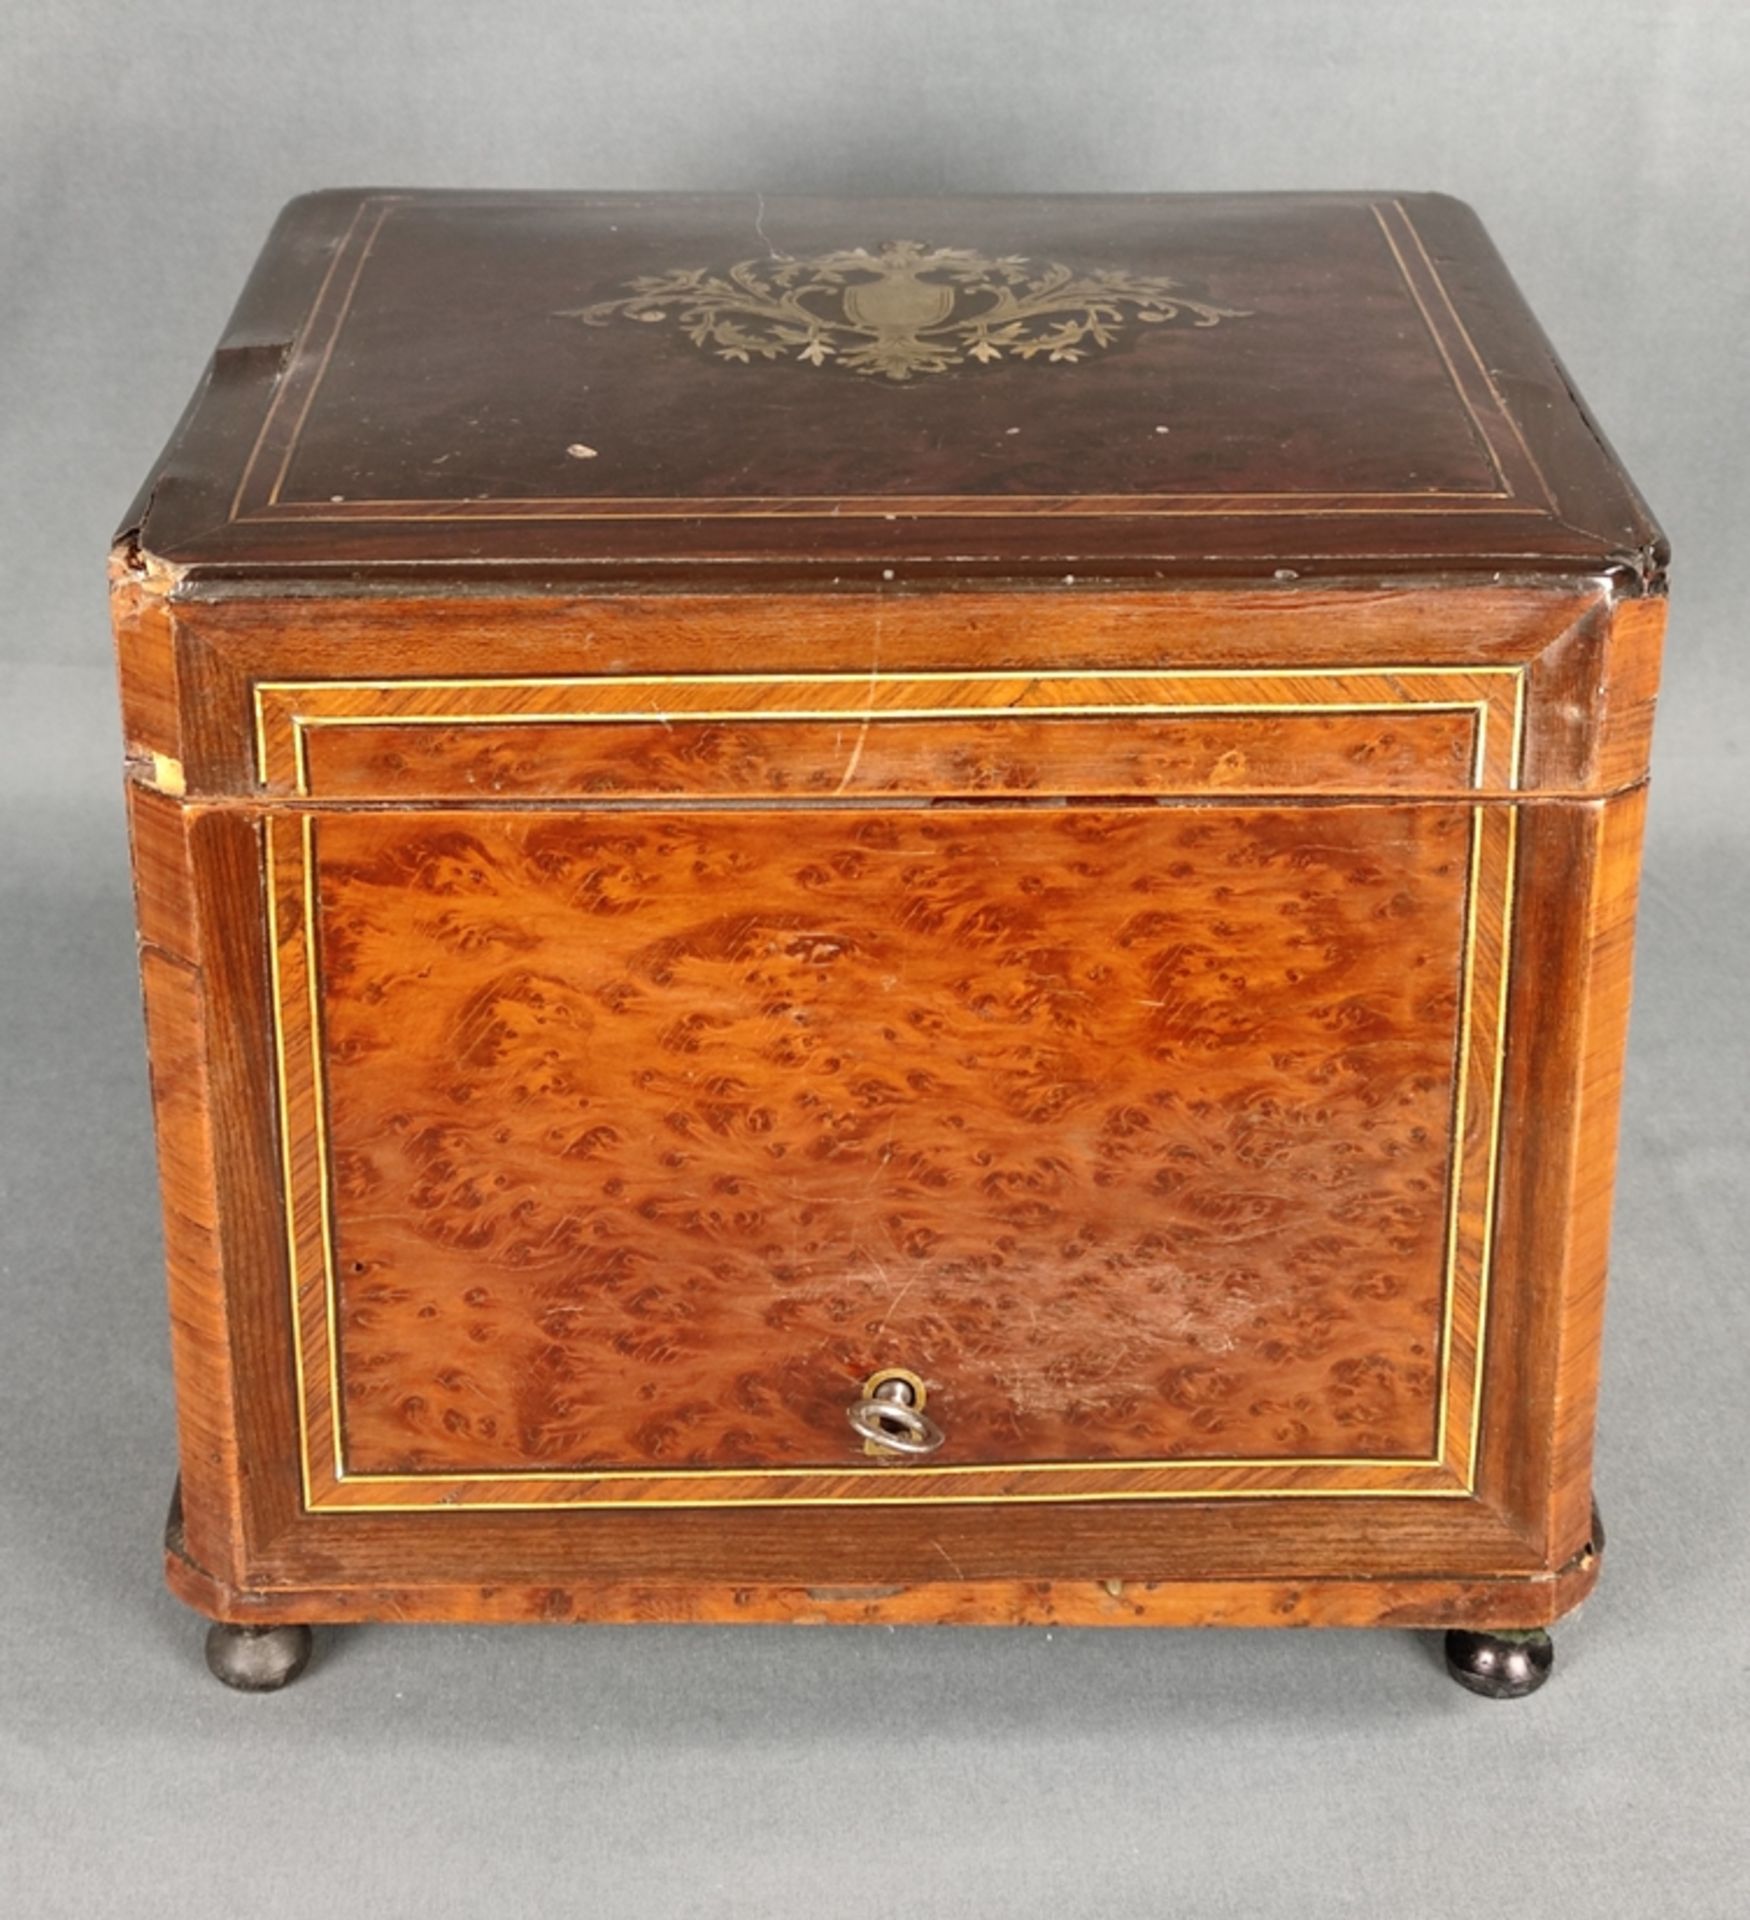 Antique humidor, cigar box, cube-shaped wooden body with burl wood veneer, lid with brass and mothe - Image 2 of 2